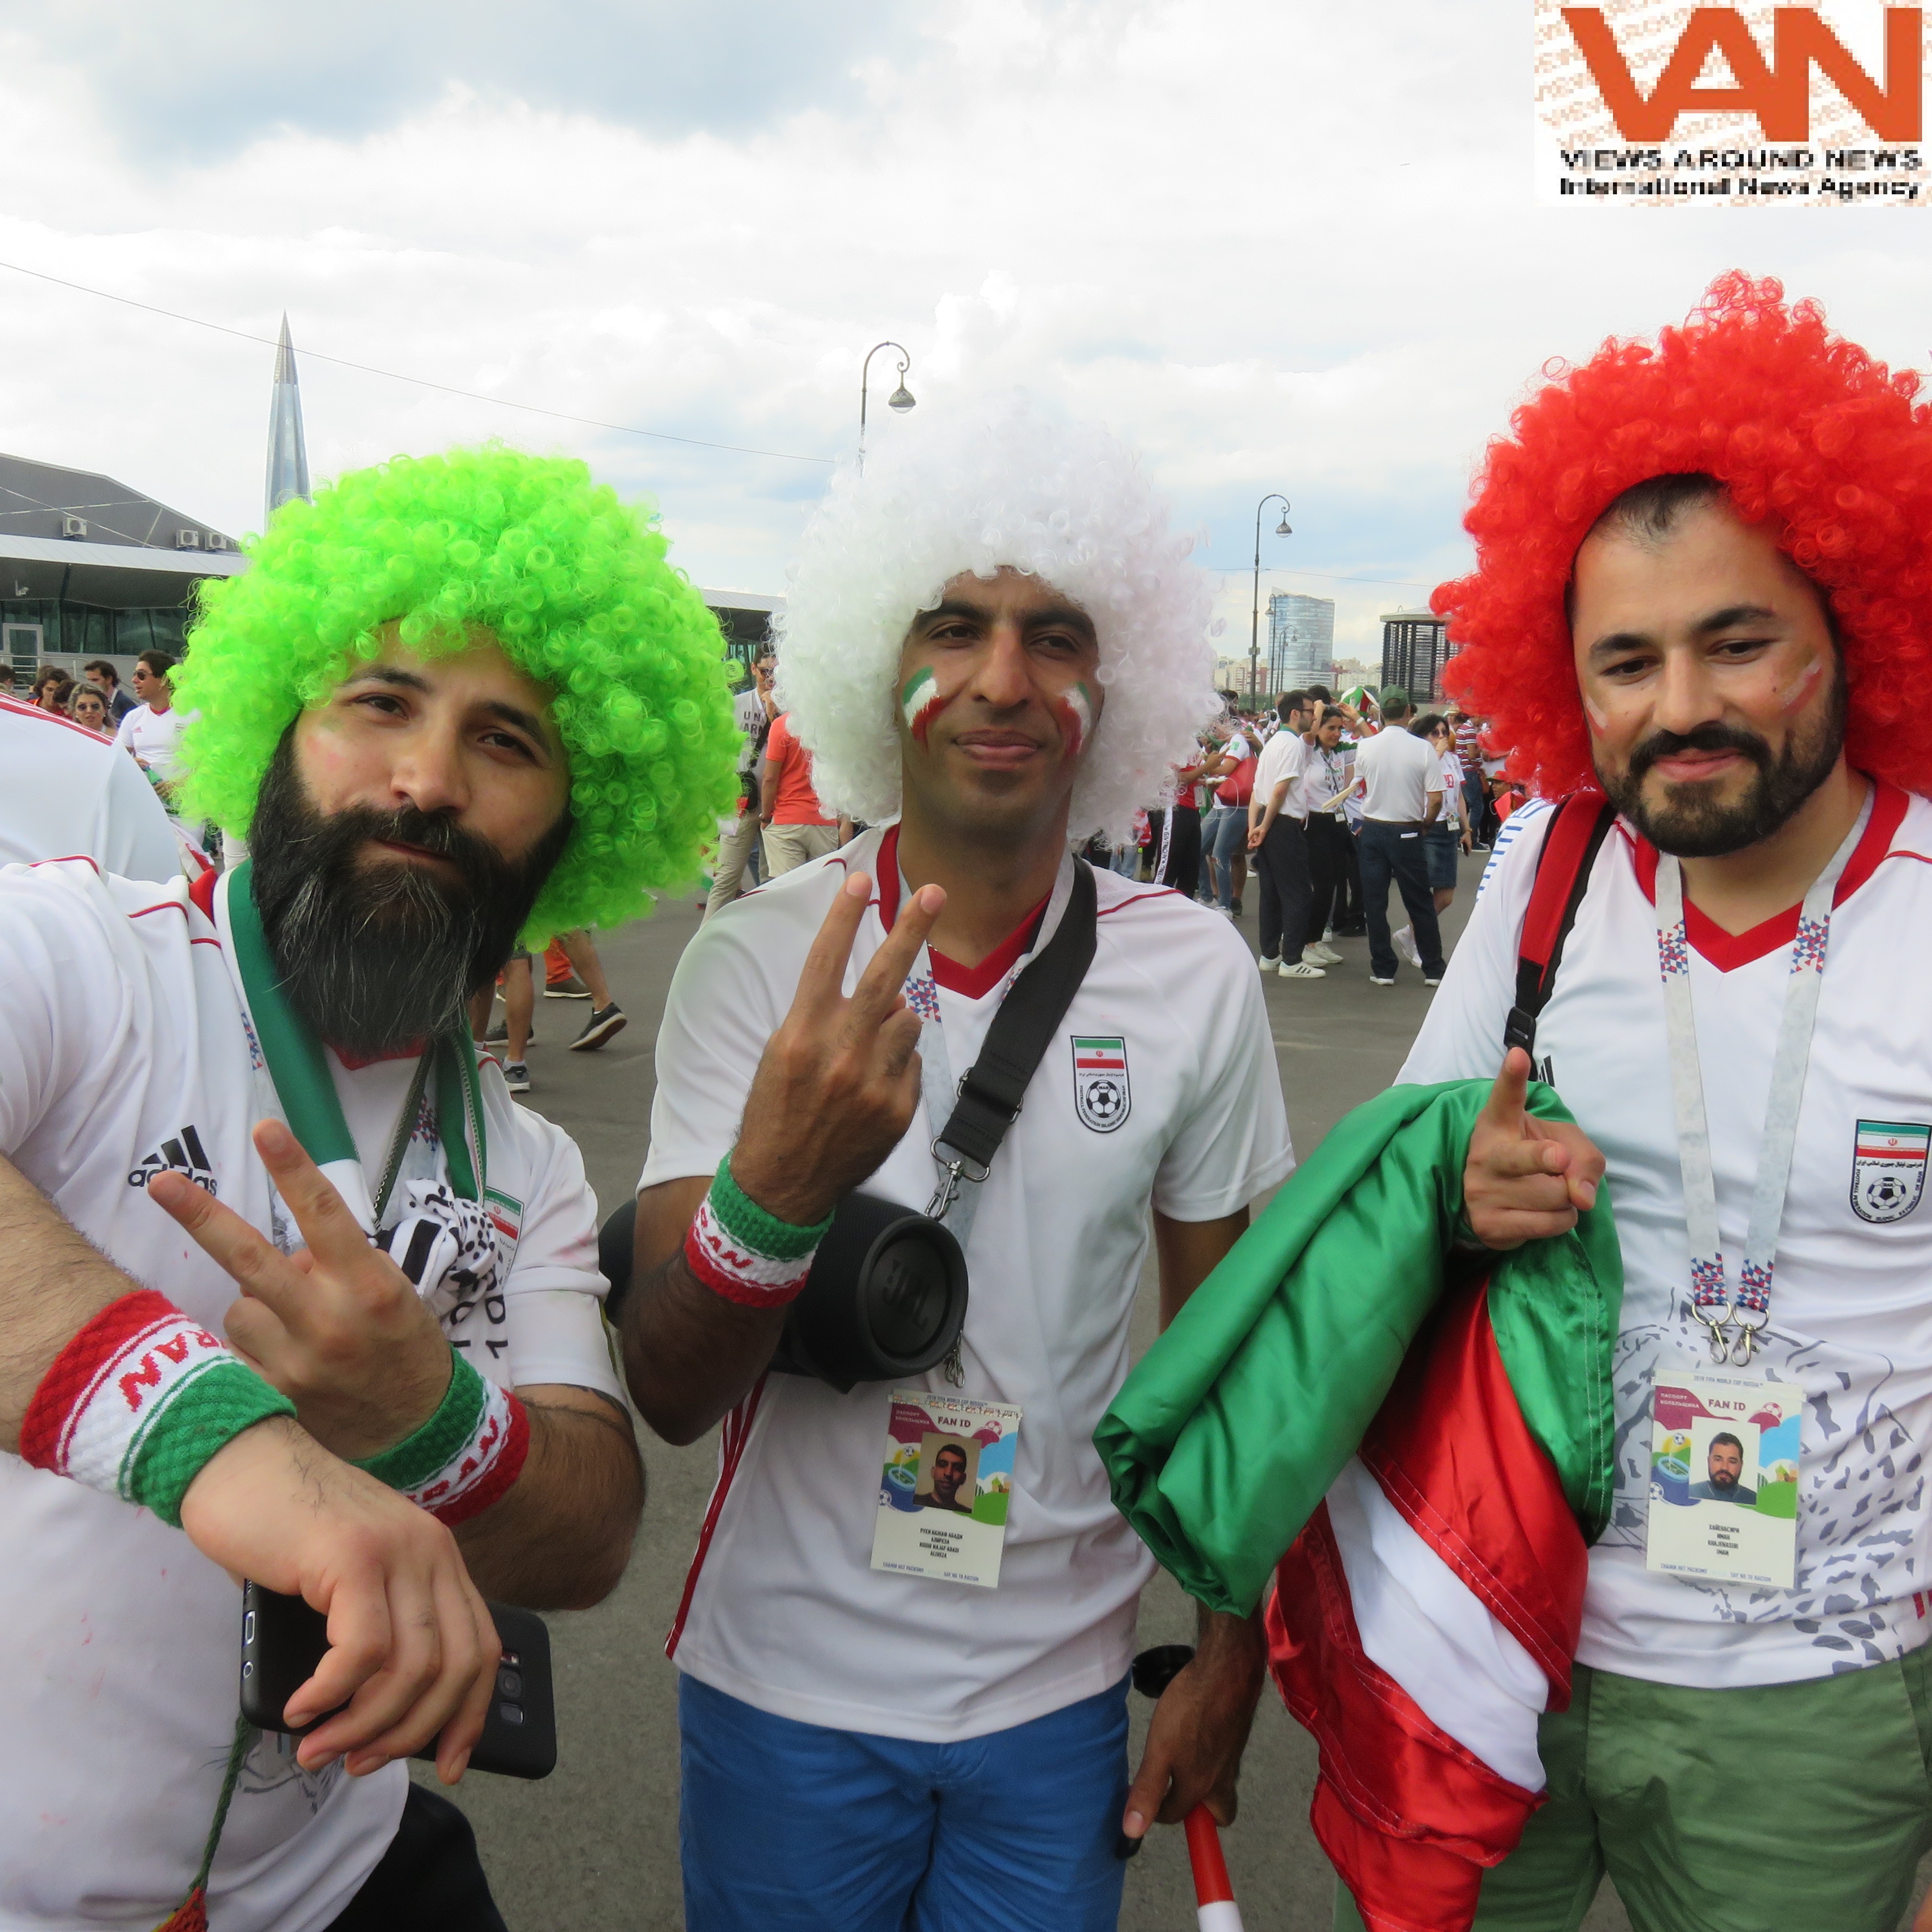 Iranian team supports are in different ways